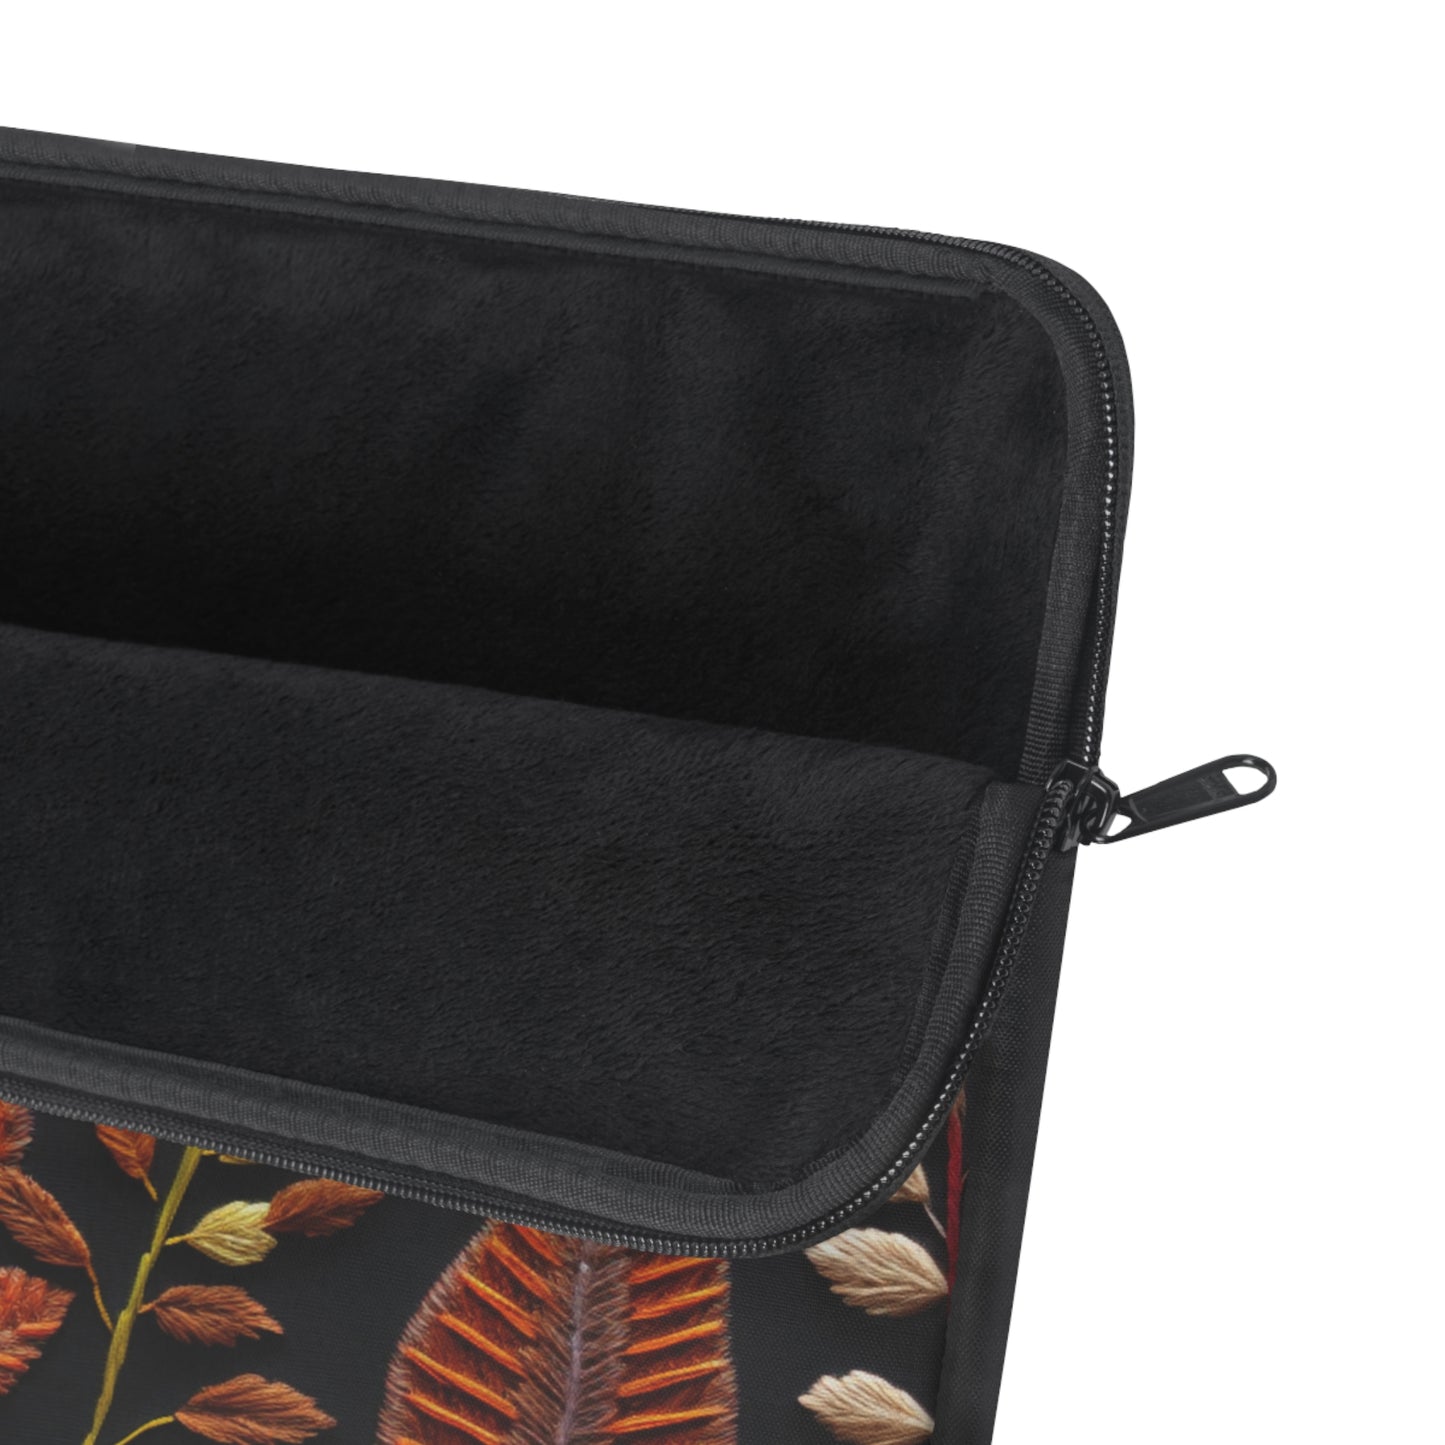 Embroidered Fall Leaves Laptop Sleeve